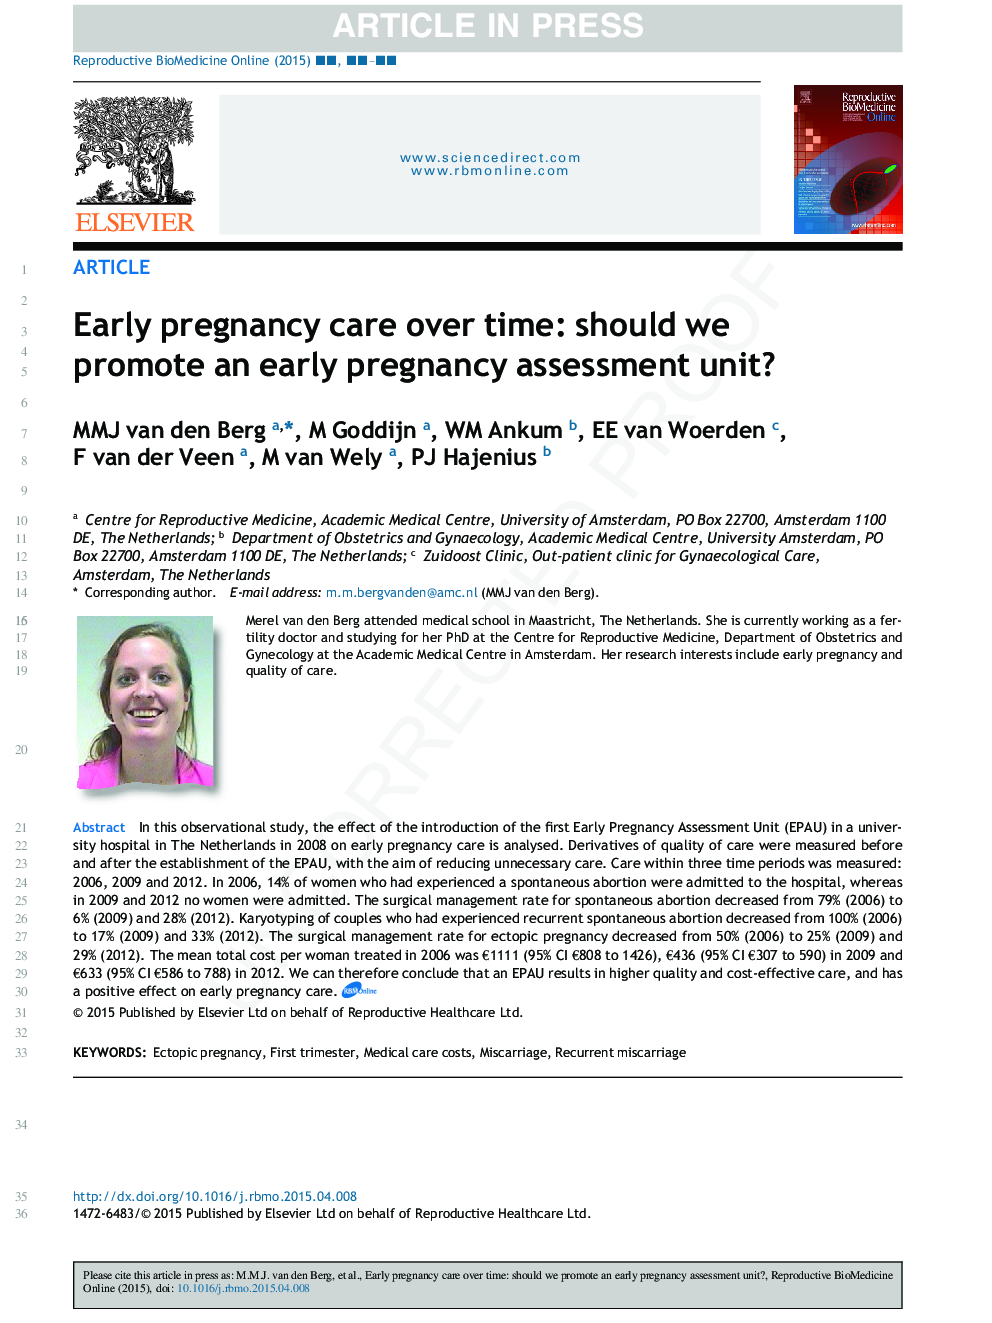 Early pregnancy care over time: should we promote an early pregnancy assessment unit?